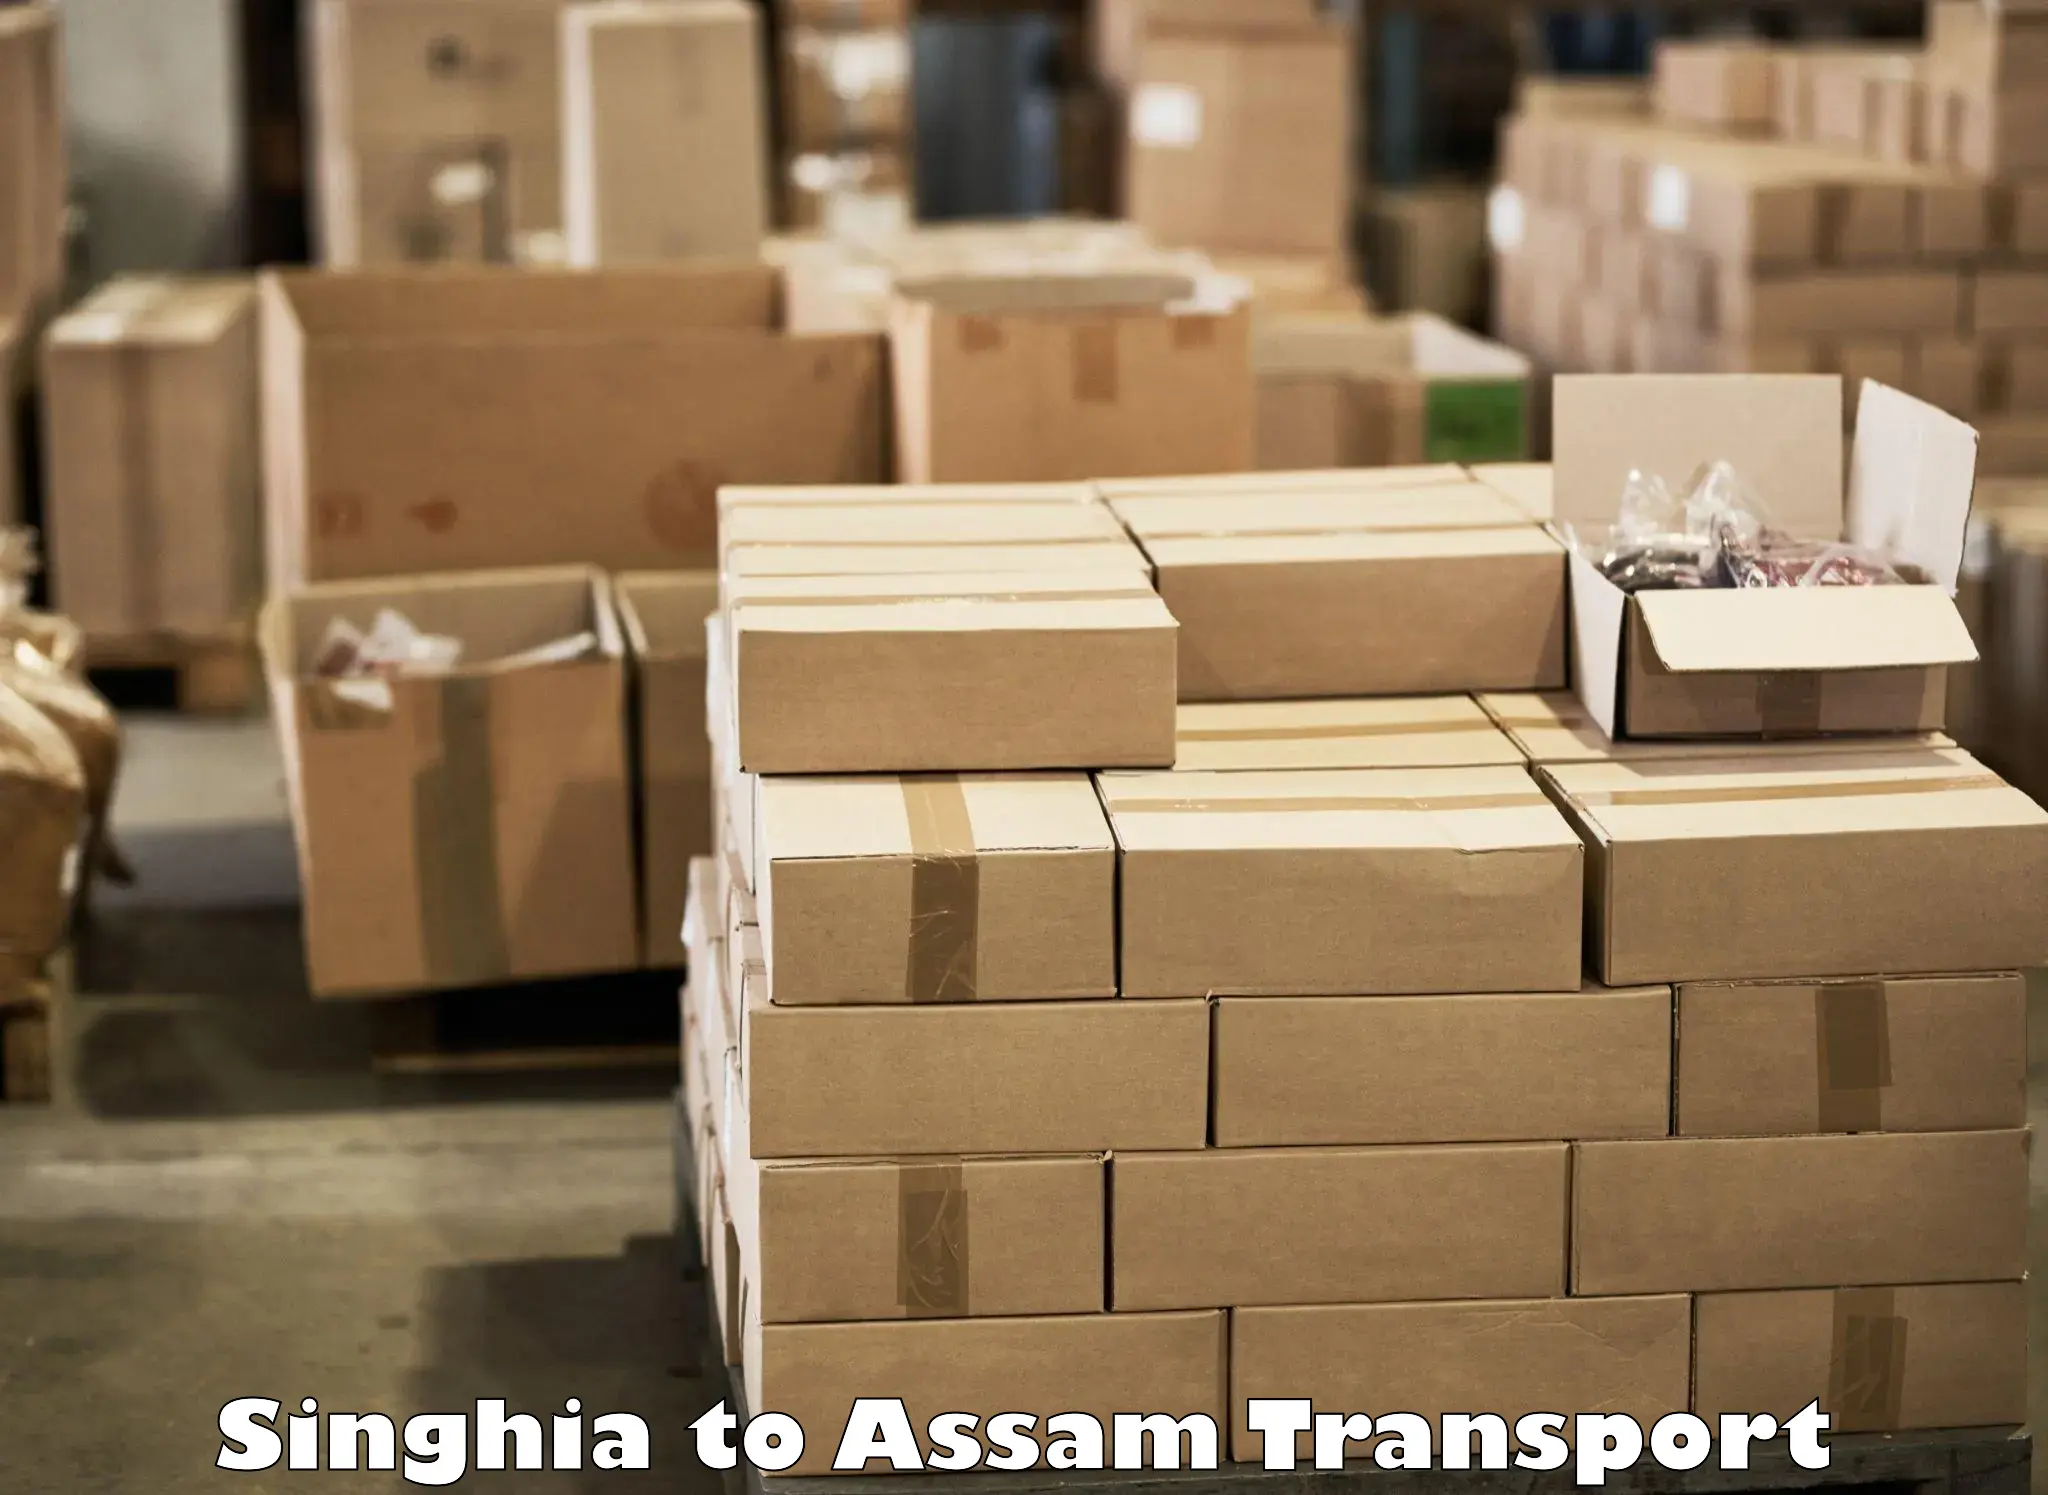 Road transport online services Singhia to Guwahati